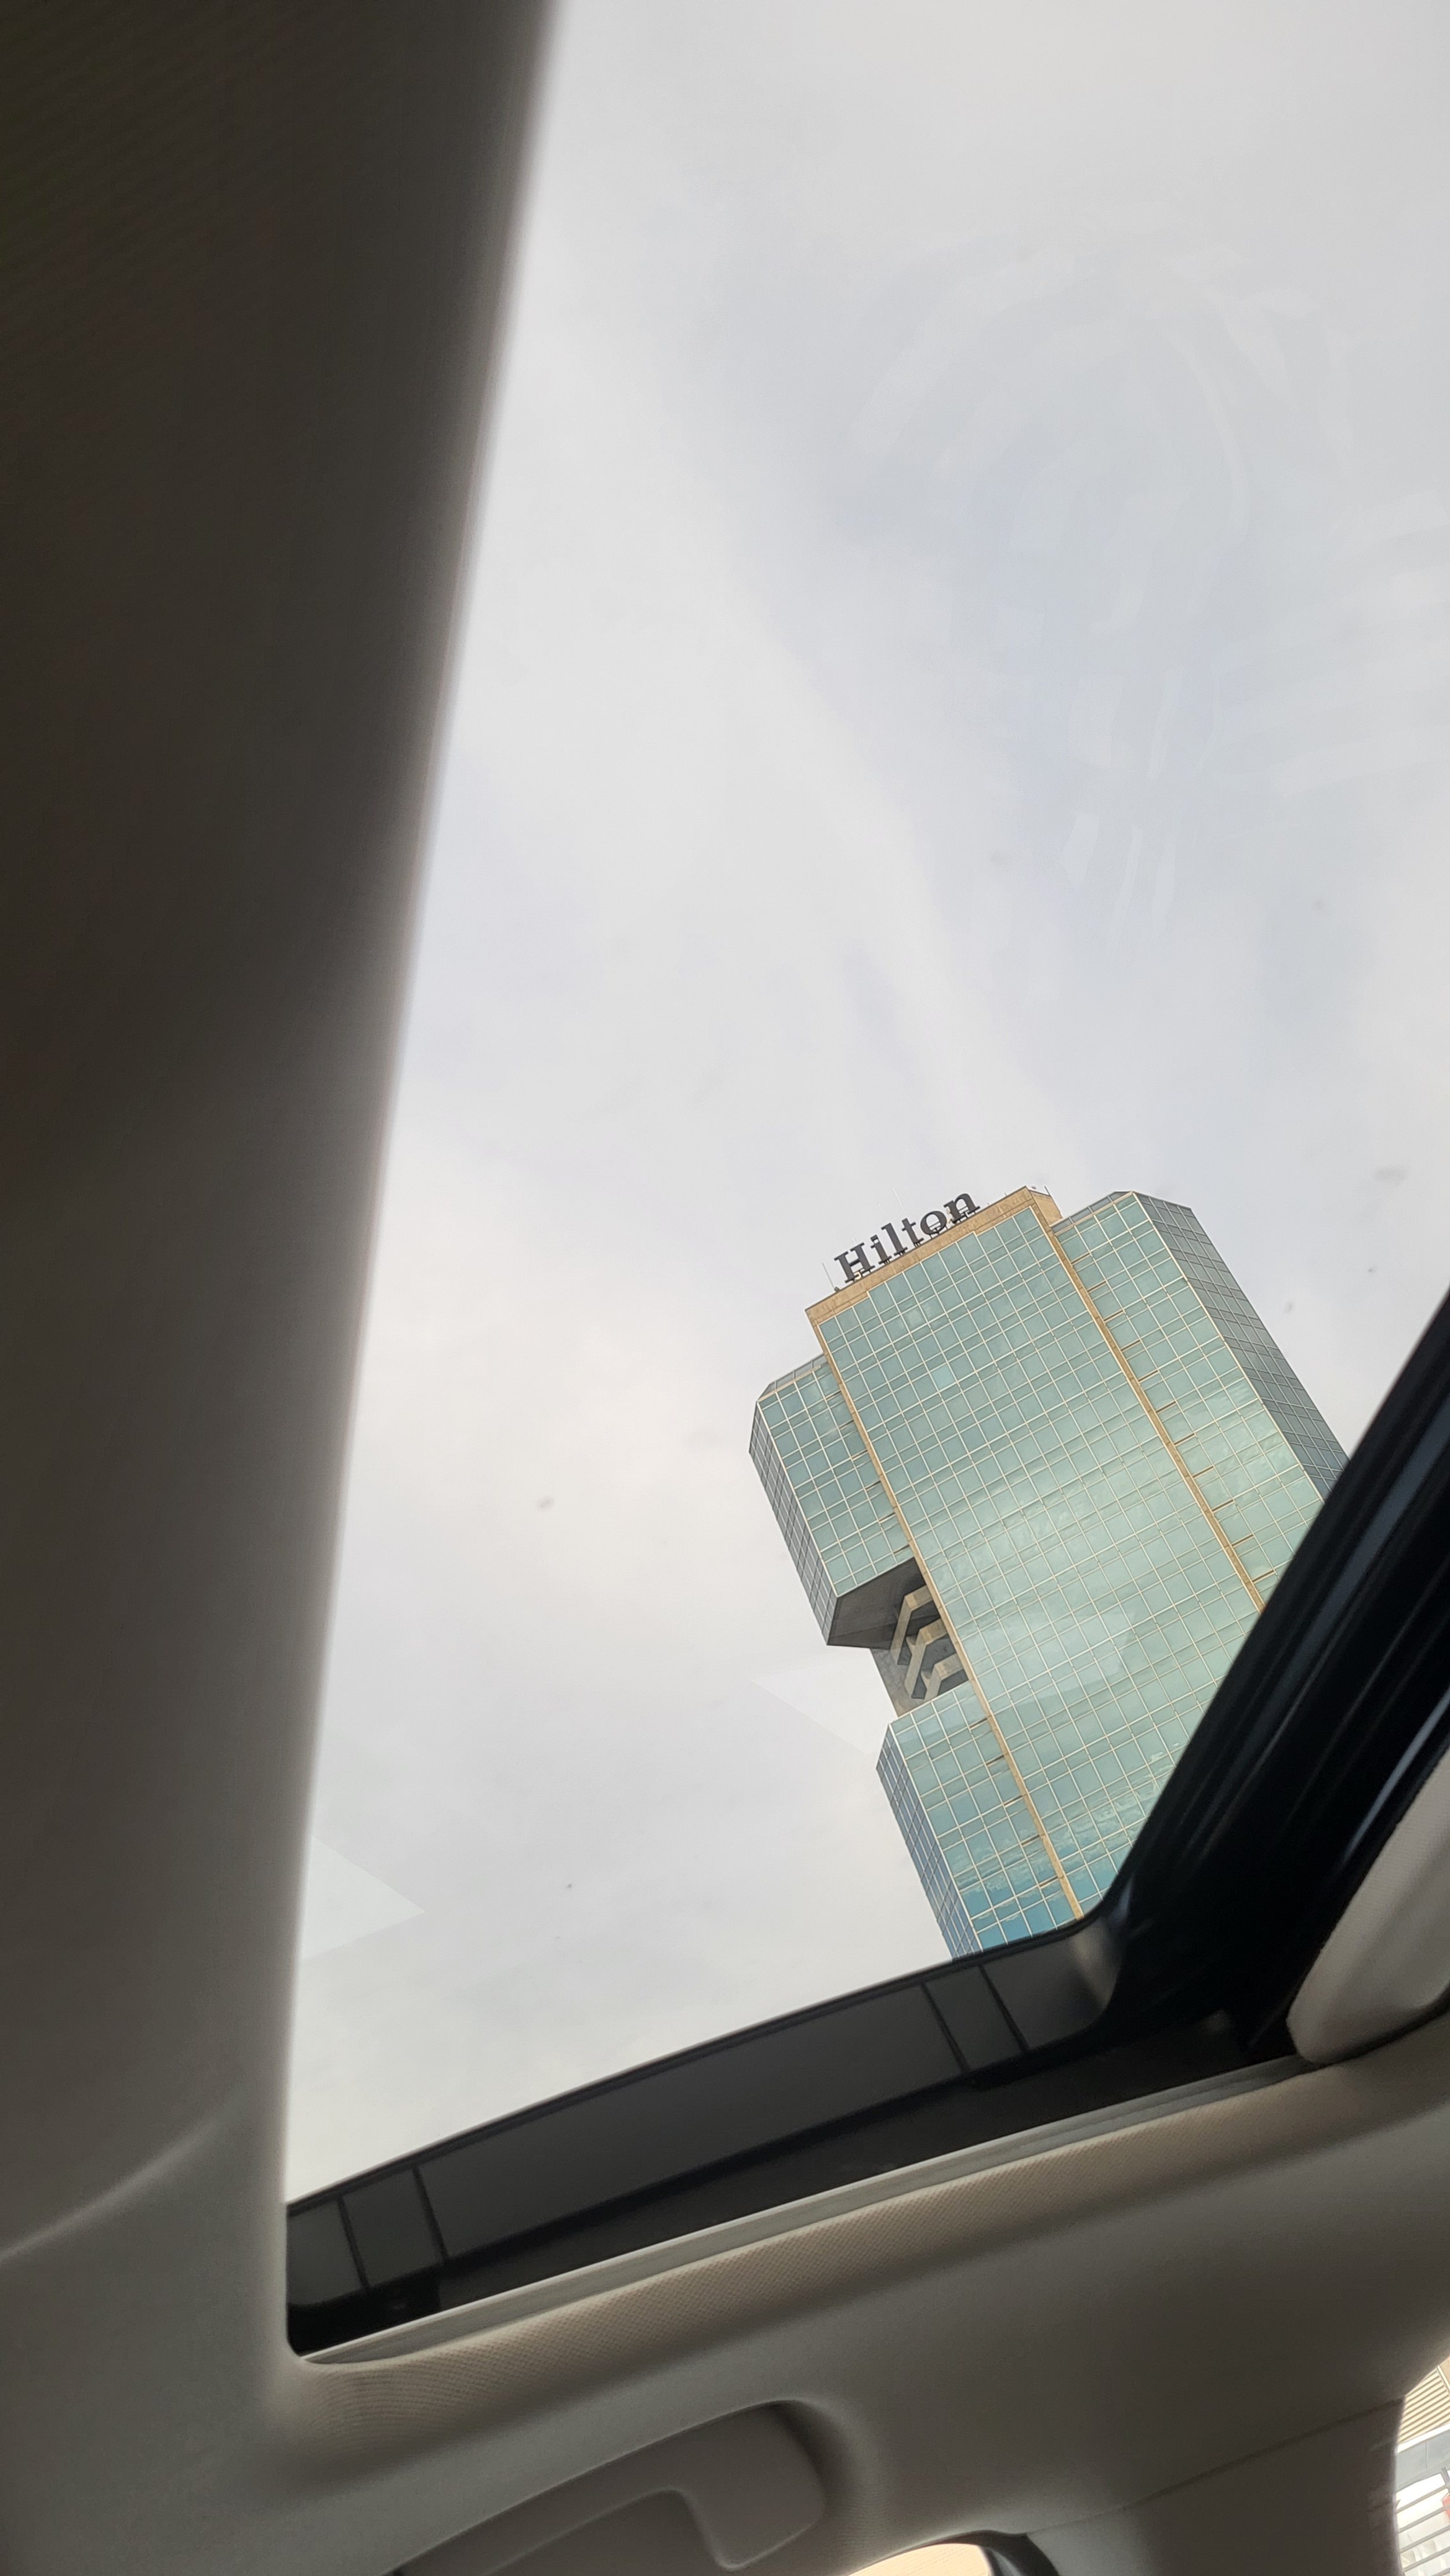  Through the sunless sunroof of her car, the Hilton Alexandria Mark Center hotel looms tall. It’s weathered concrete verticality almost disappears against the grey skies. Brutalist in appearance, one can scarcely believe it will house some of the mos